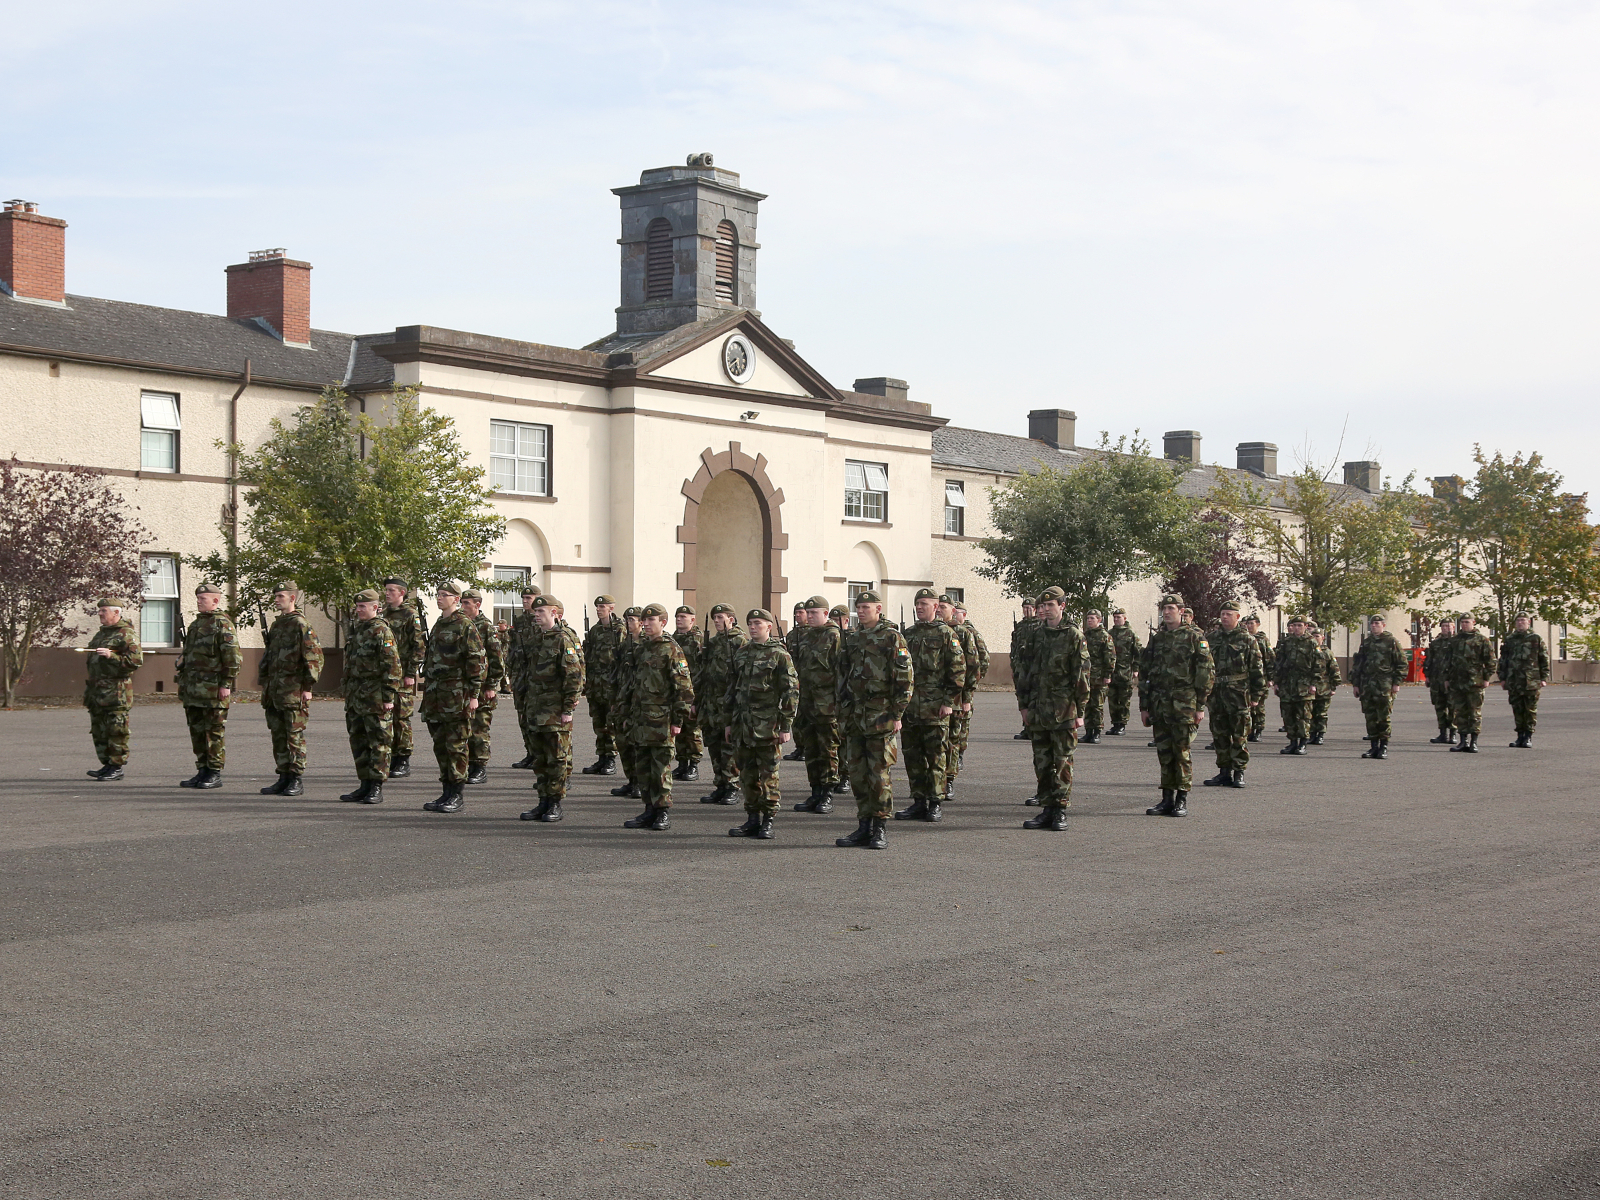 Recruits_and_Potential_NCOs_of_the_1_Southern_Brigade_RDF_who_had_their_Passing_Out_Parade_in_Stephens_Barracks_Kilkenny_(8018906043) (1)